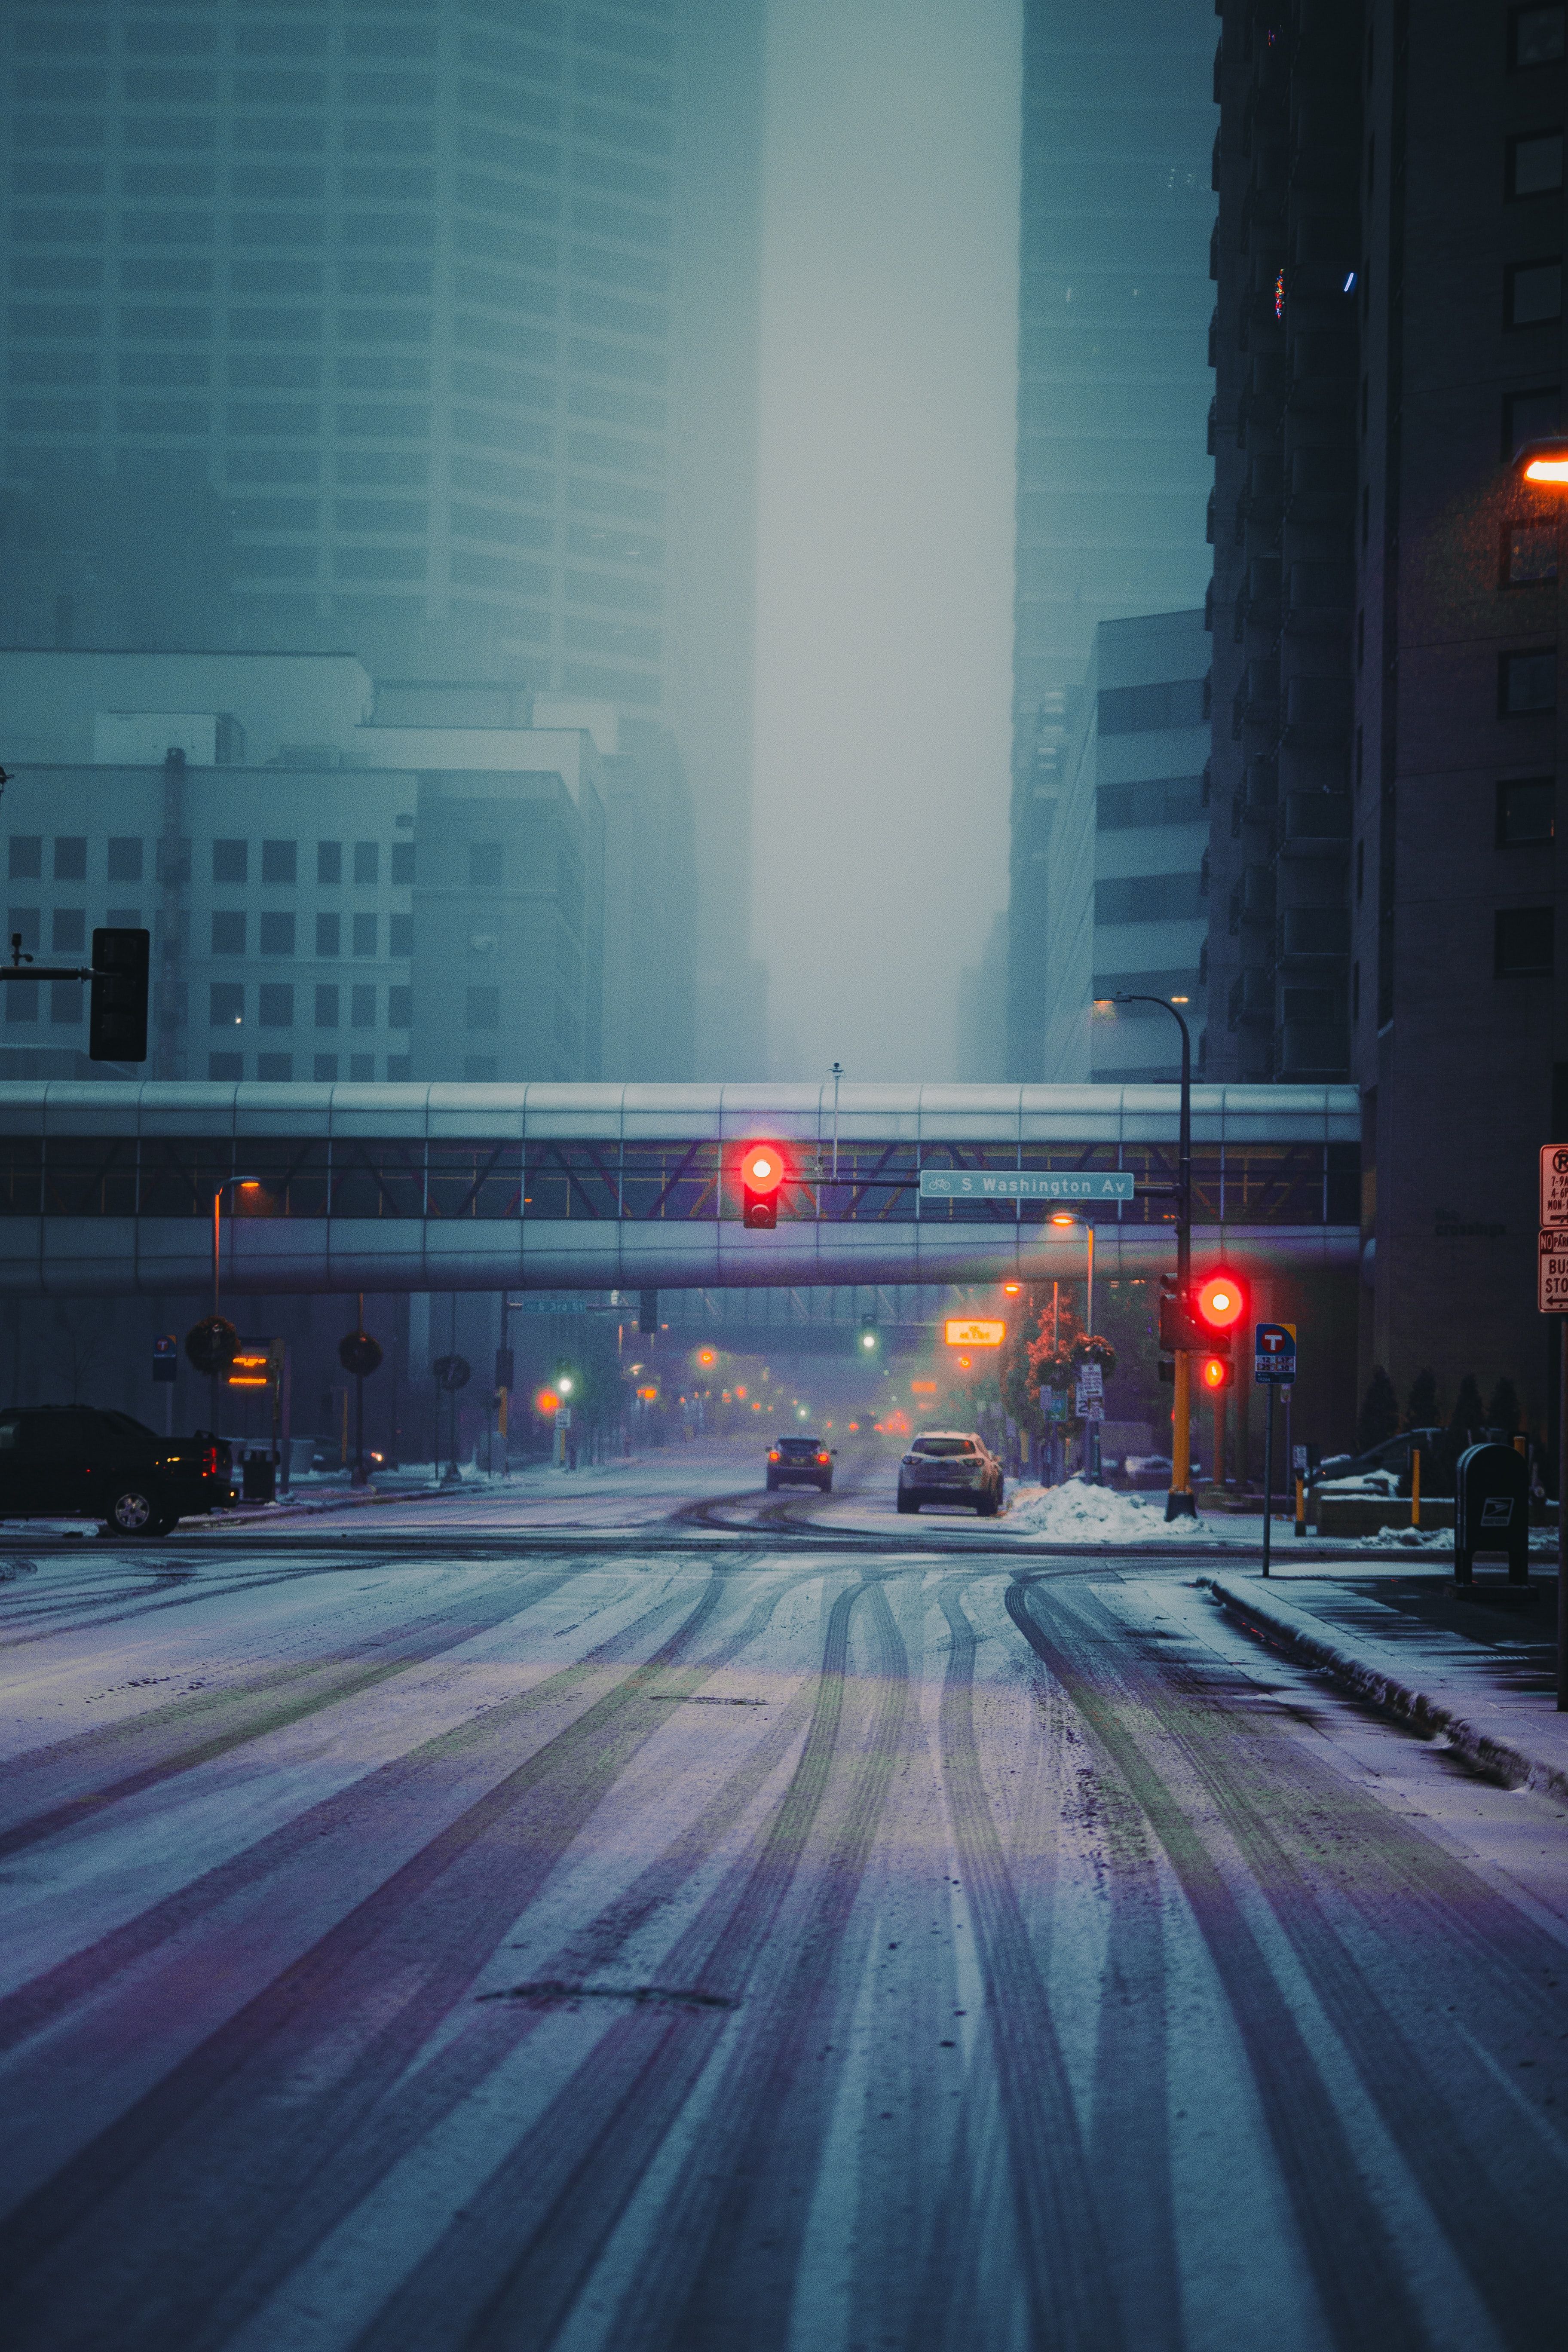 A street with snow and traffic lights - Road